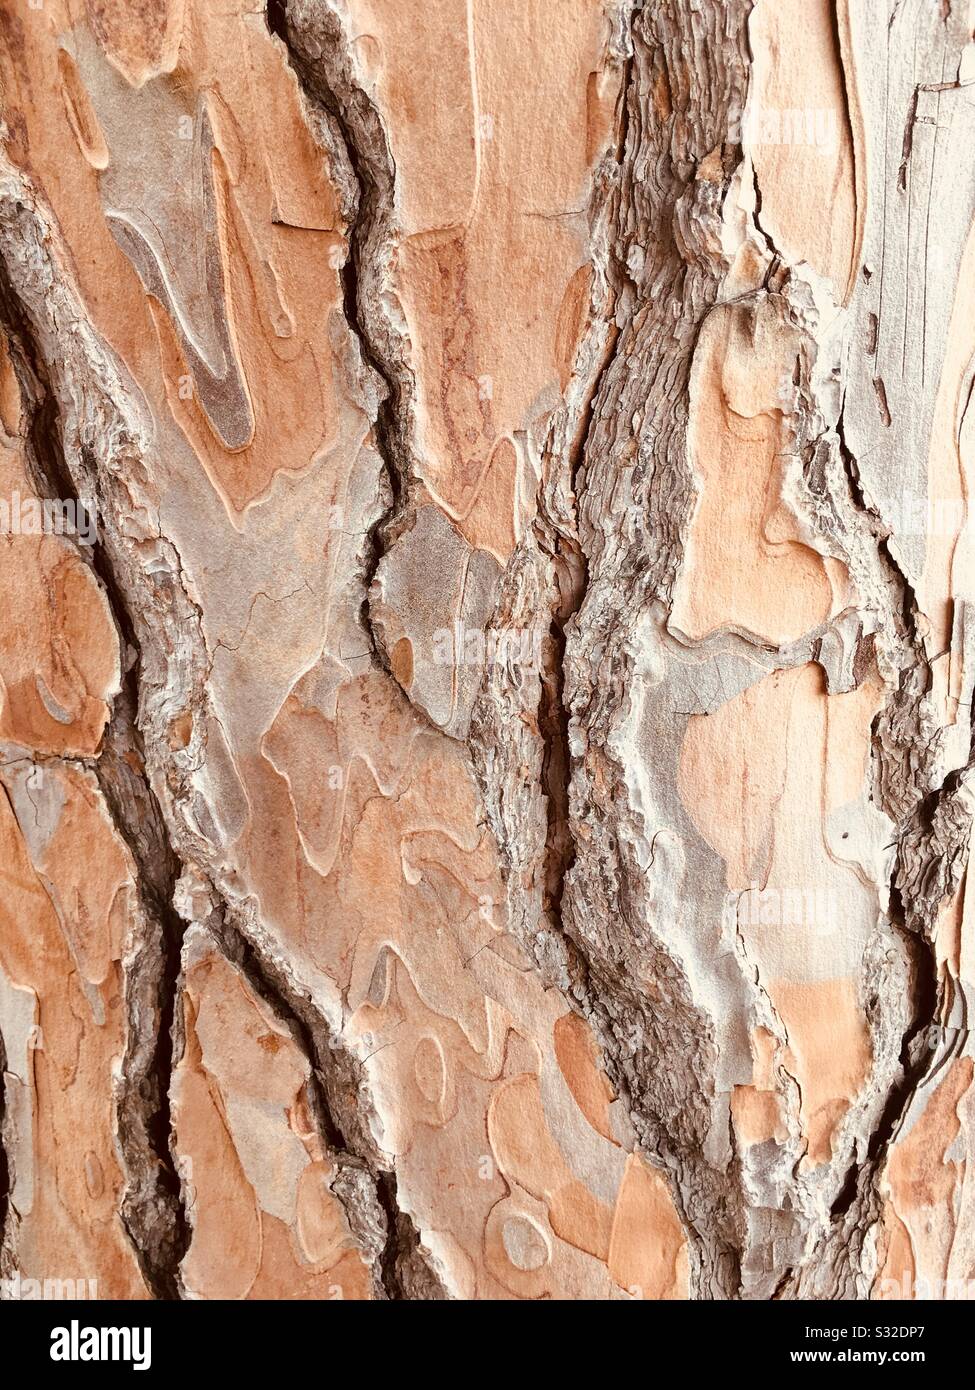 Tree bark with unique patterns Stock Photo